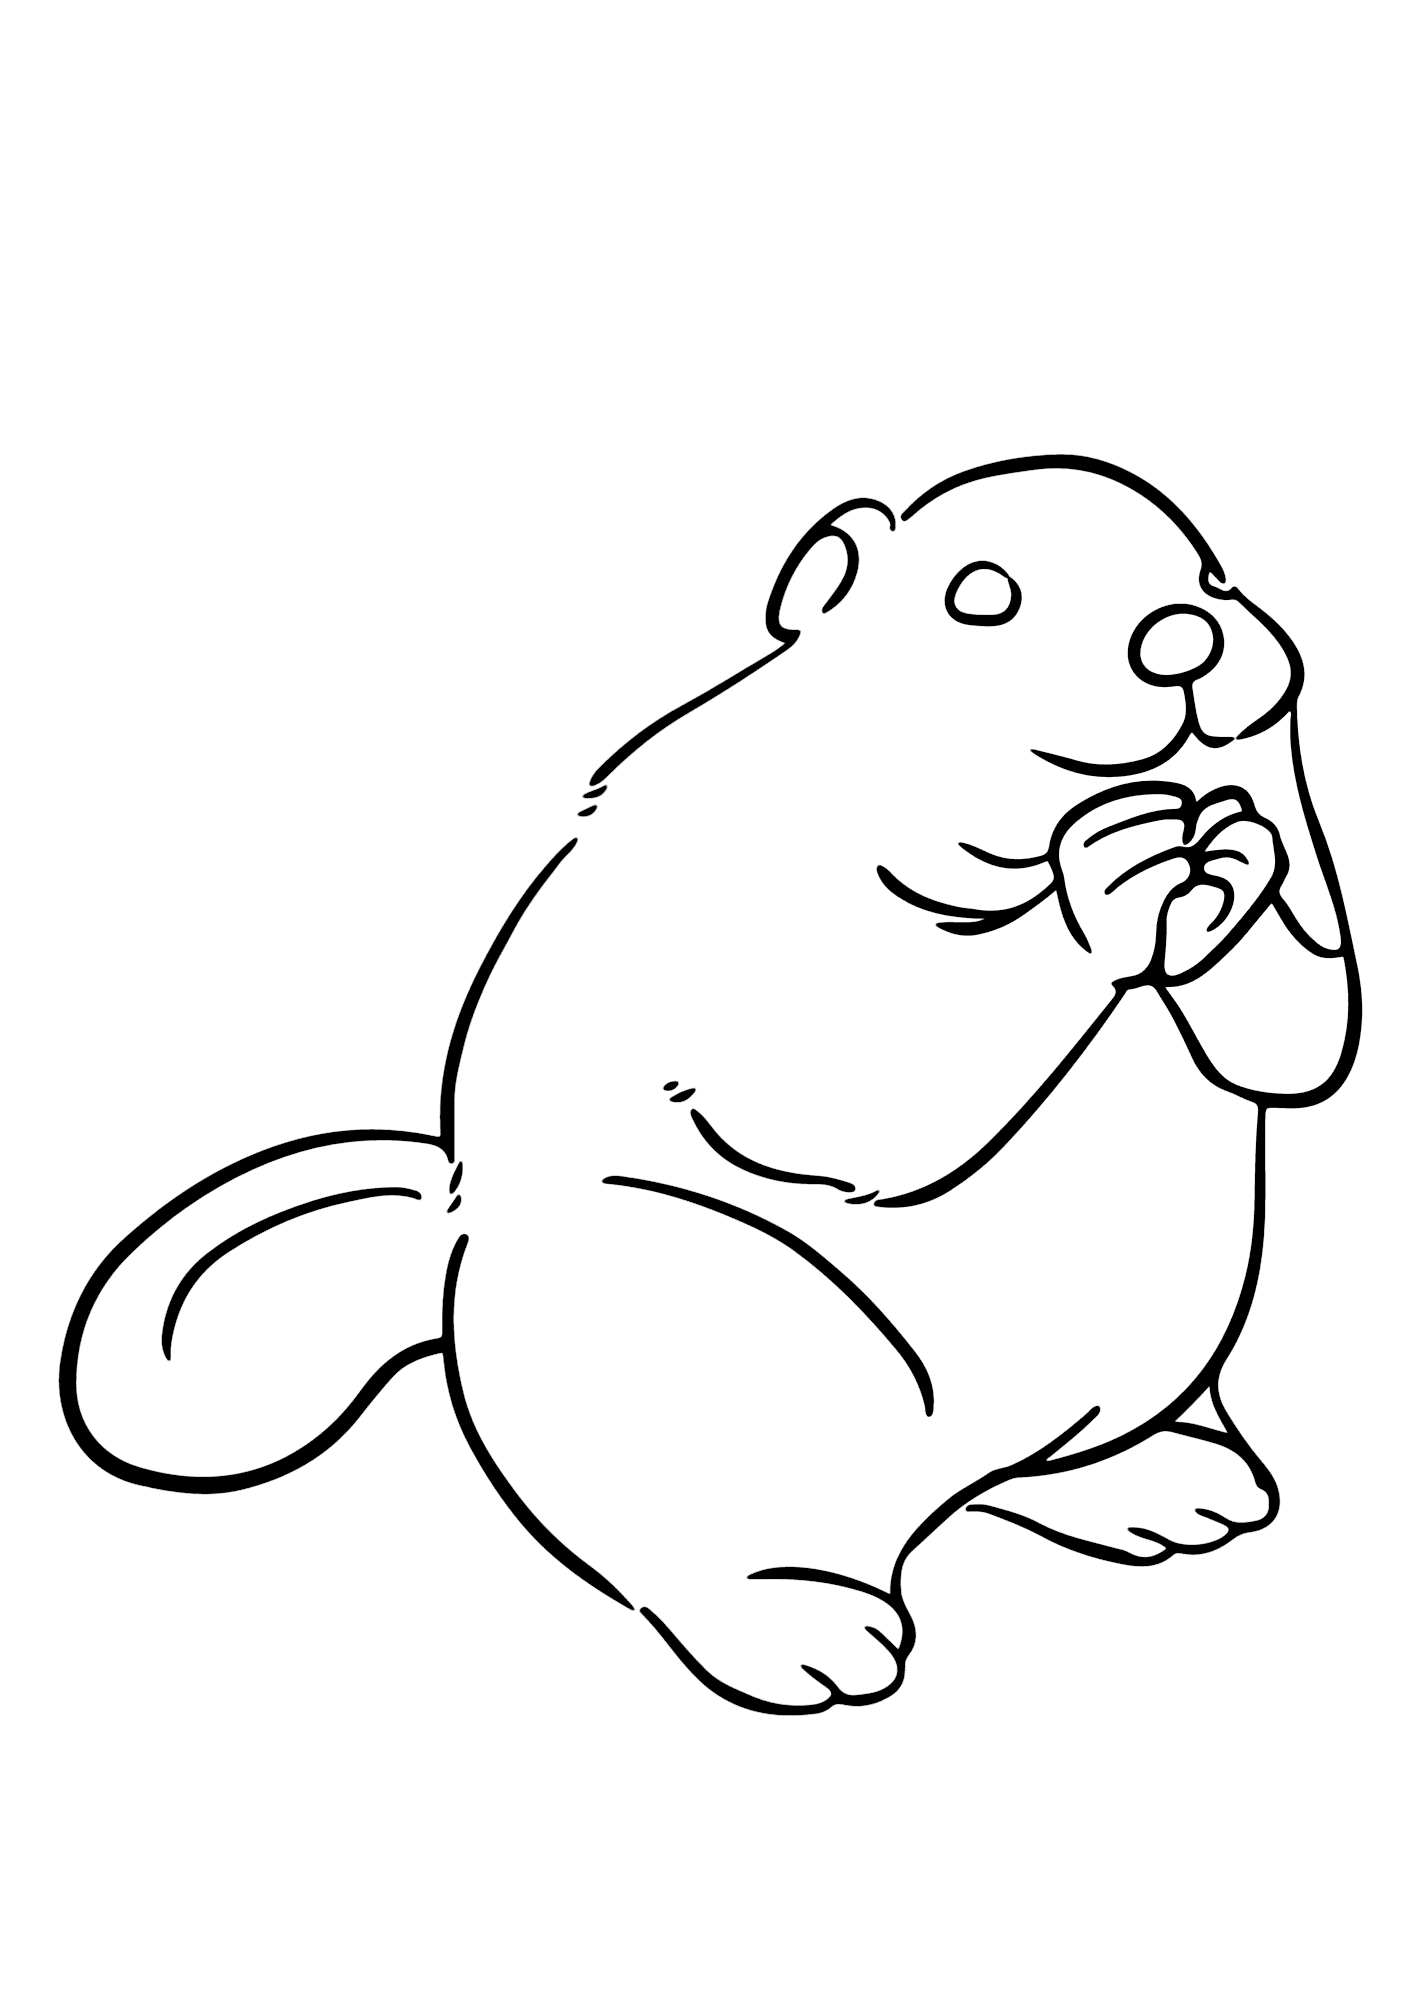 Cute Beaver Picture Coloring Page